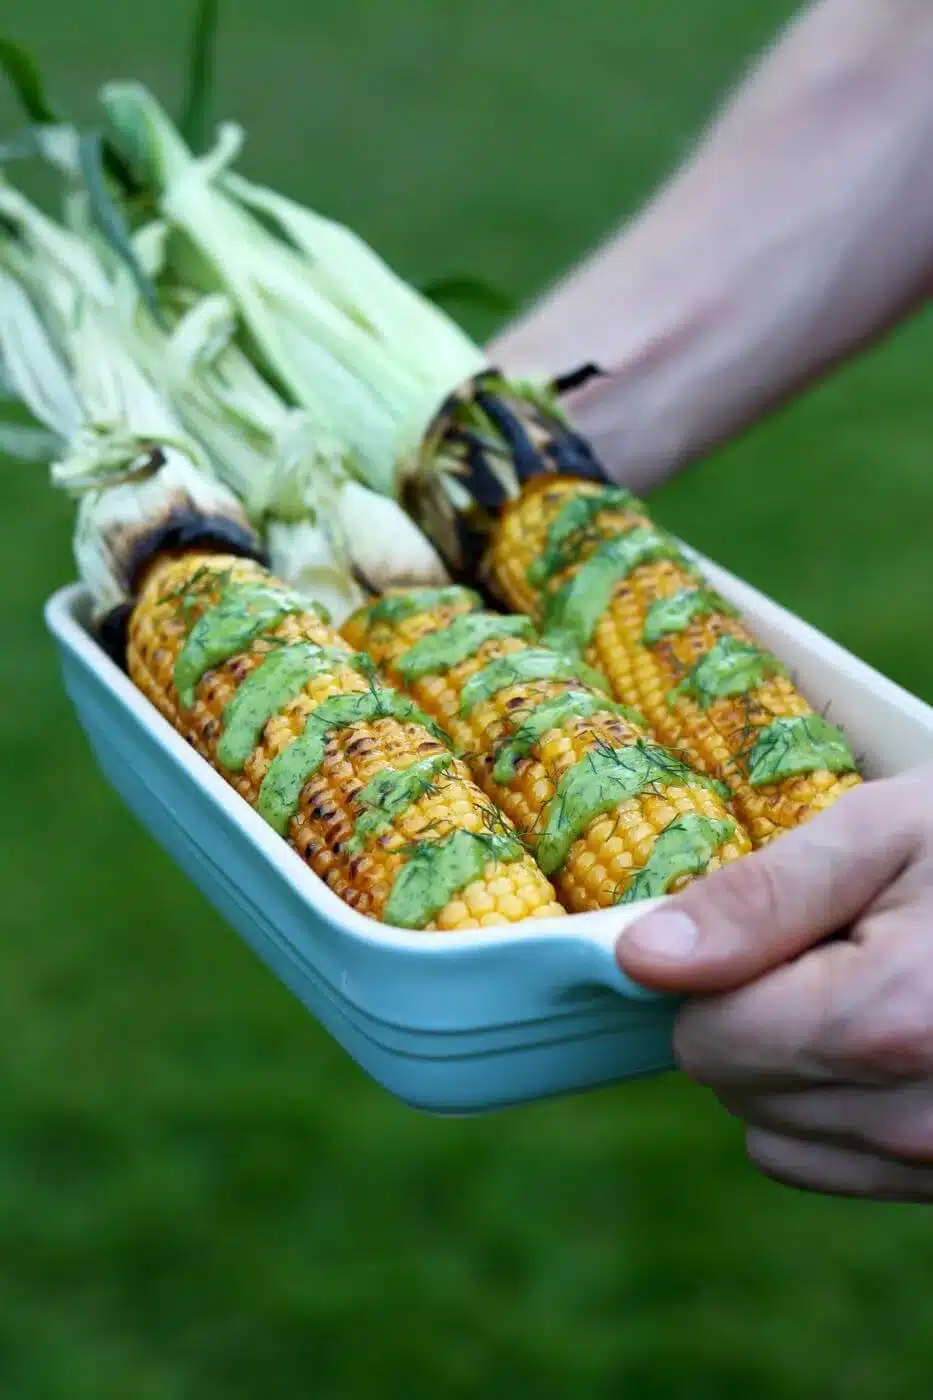 Hands holding baking dish filled with grilled corn on the cob drizzled with avocado dill dressing.